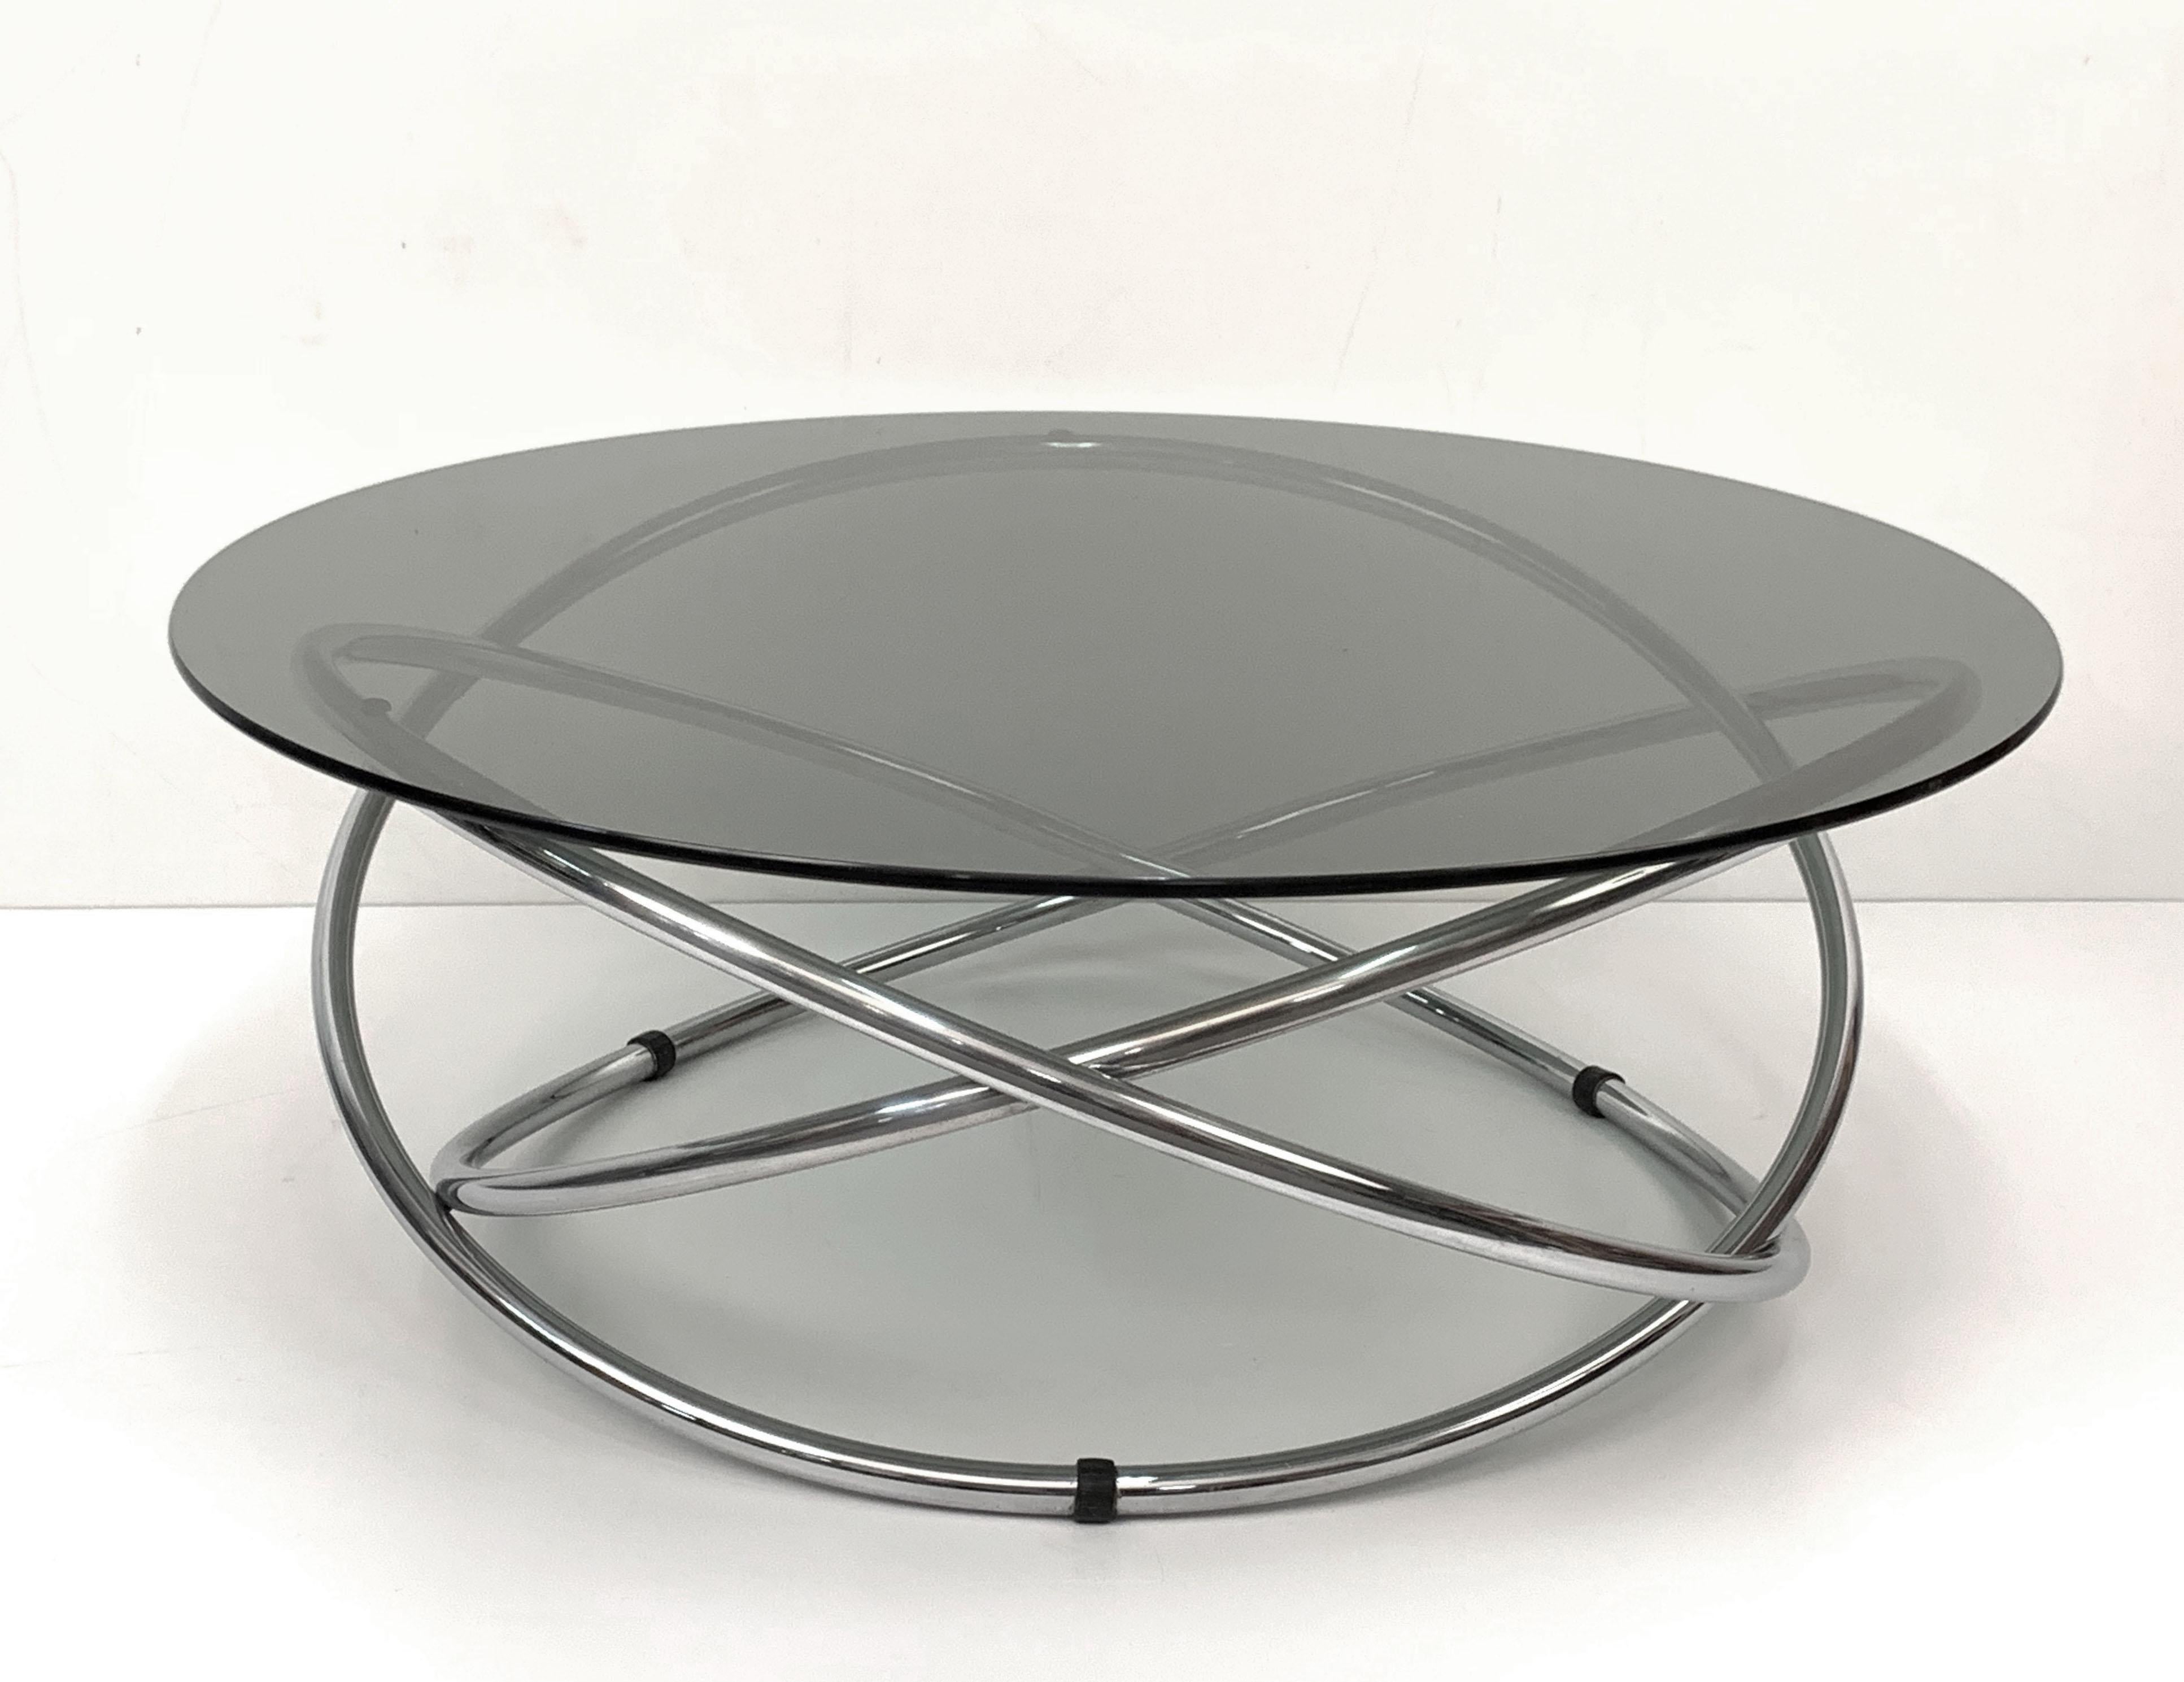 Late 20th Century Midcentury Chromed Steel Italian Coffee Table with Smoked Glass Top, 1960s